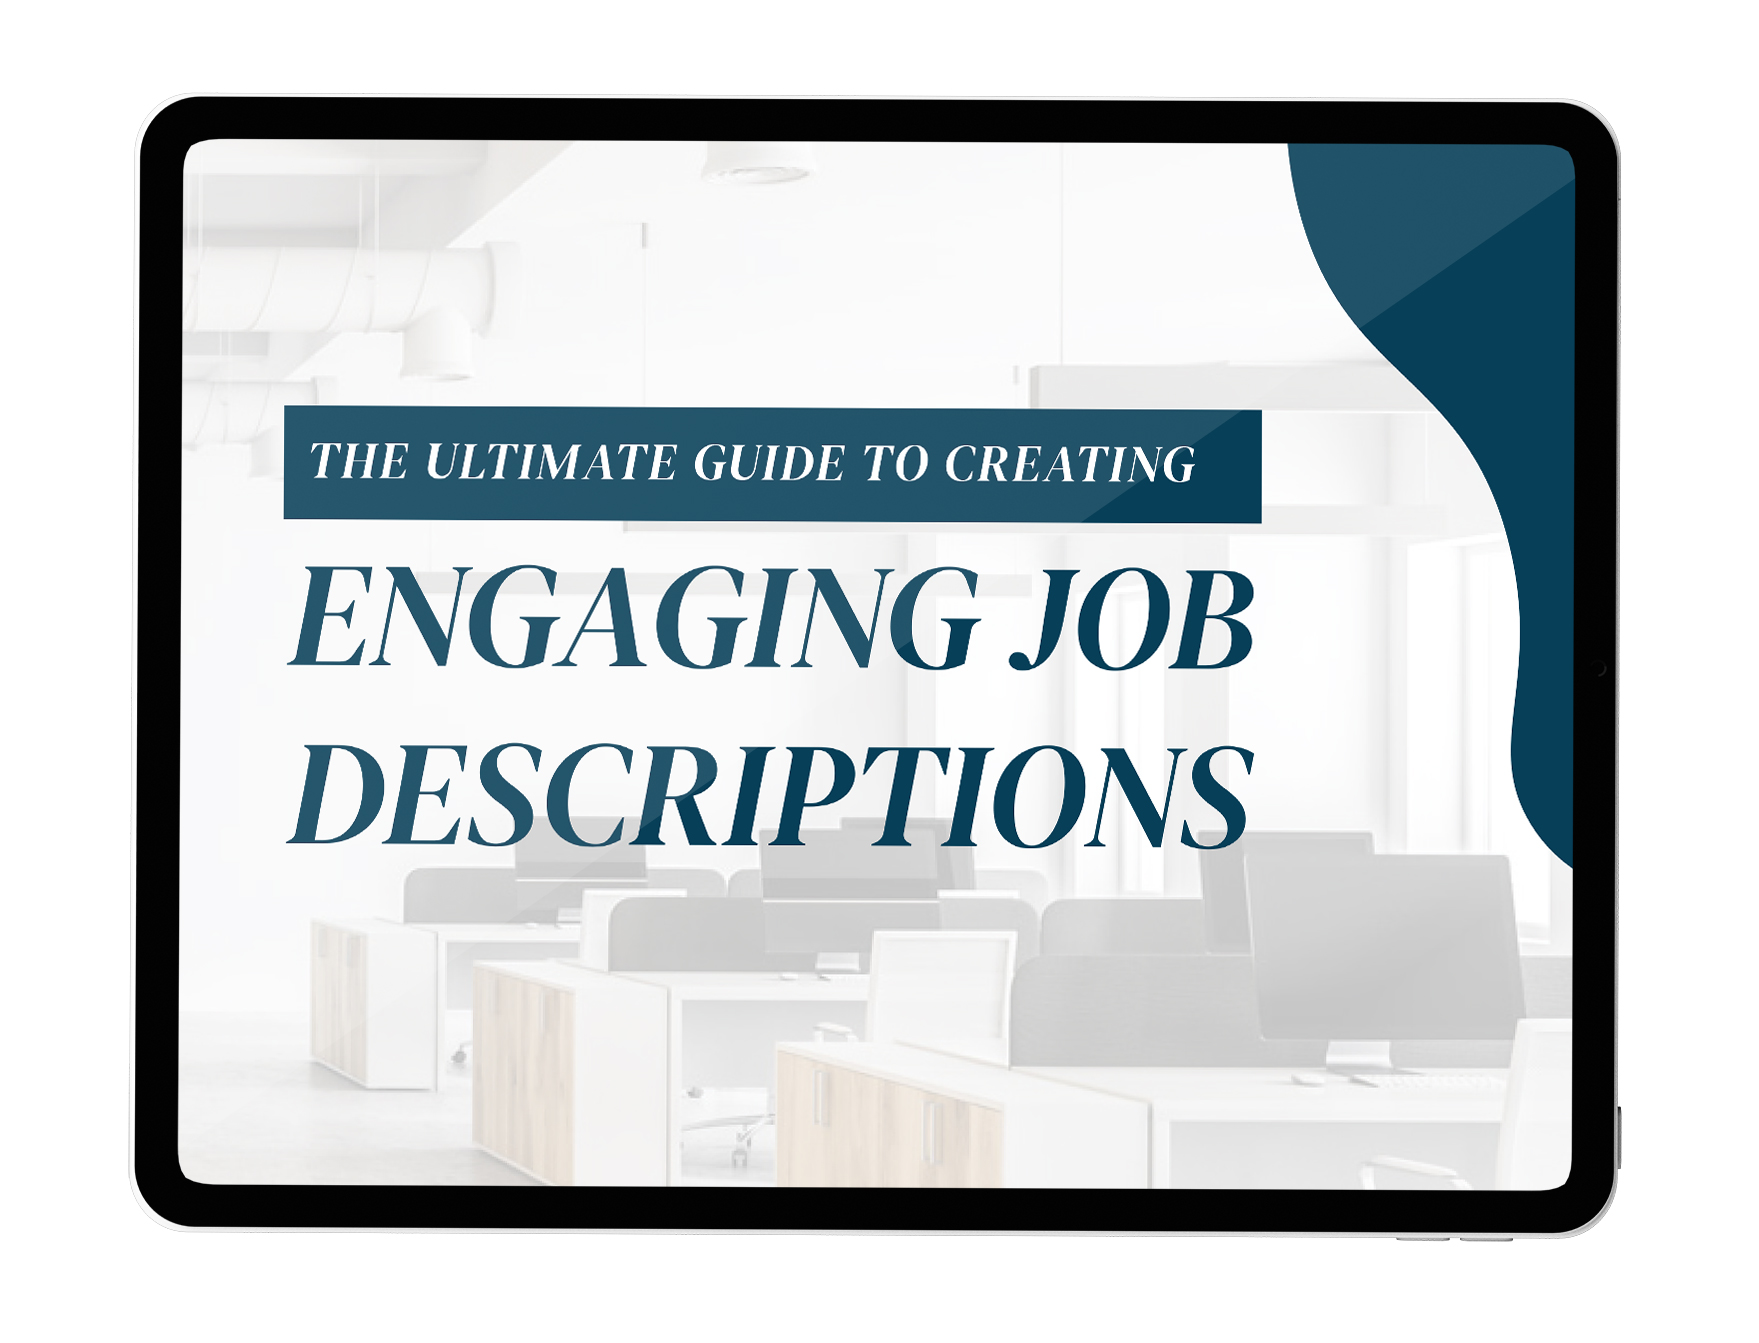 The ultimate guide to creating engaging job descriptions